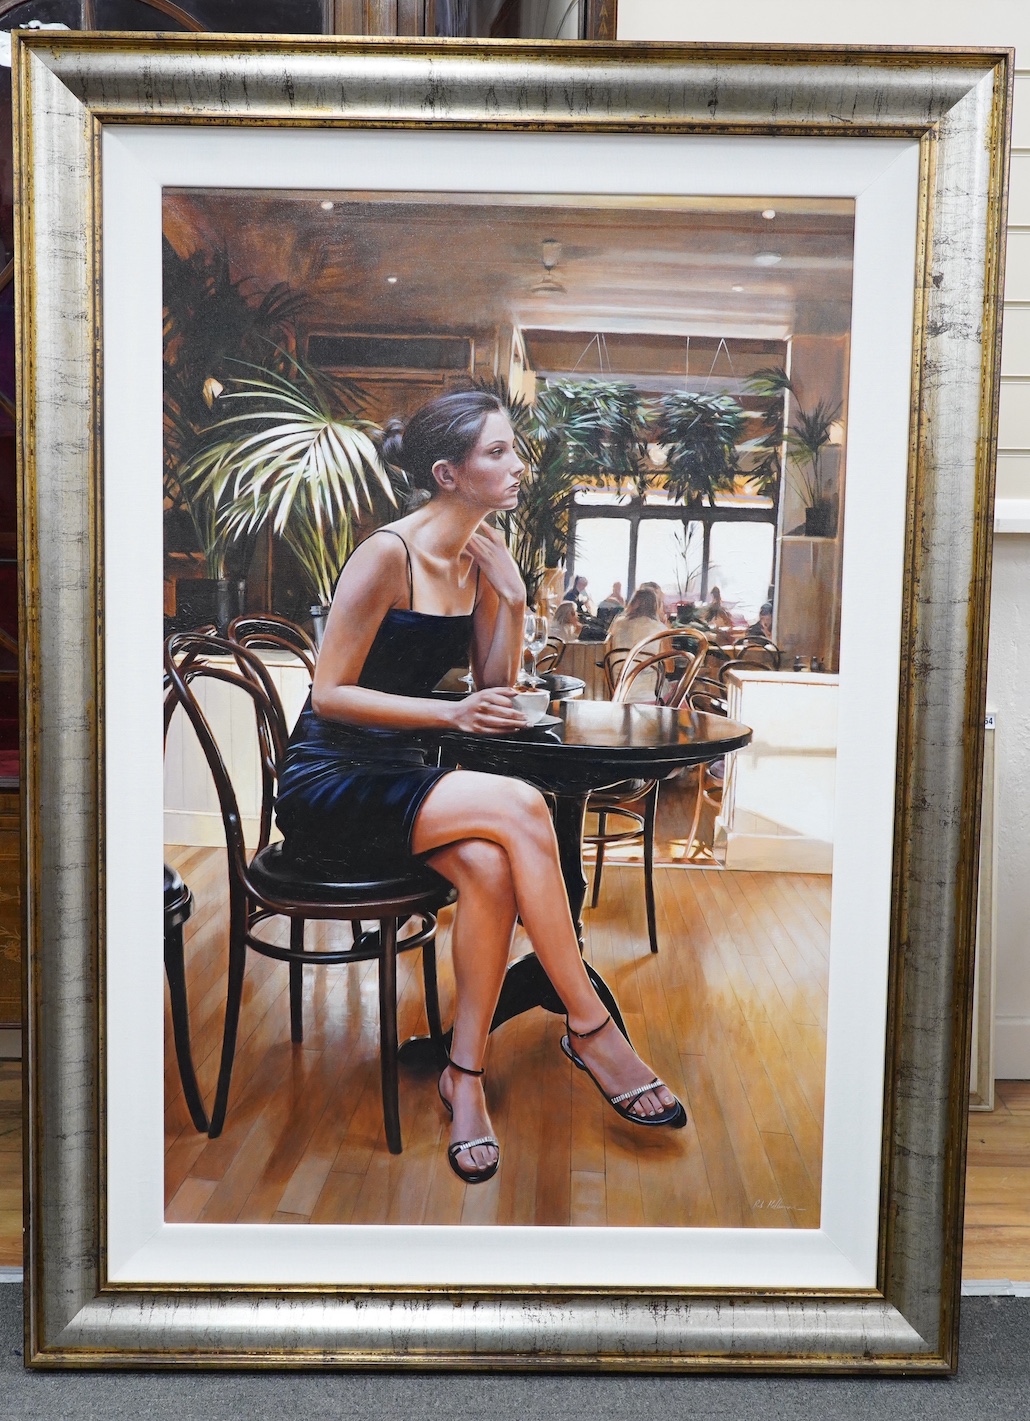 Rob Hefferan (b.1968), oil on canvas, Café scene with seated woman, signed, 110 x 72cm